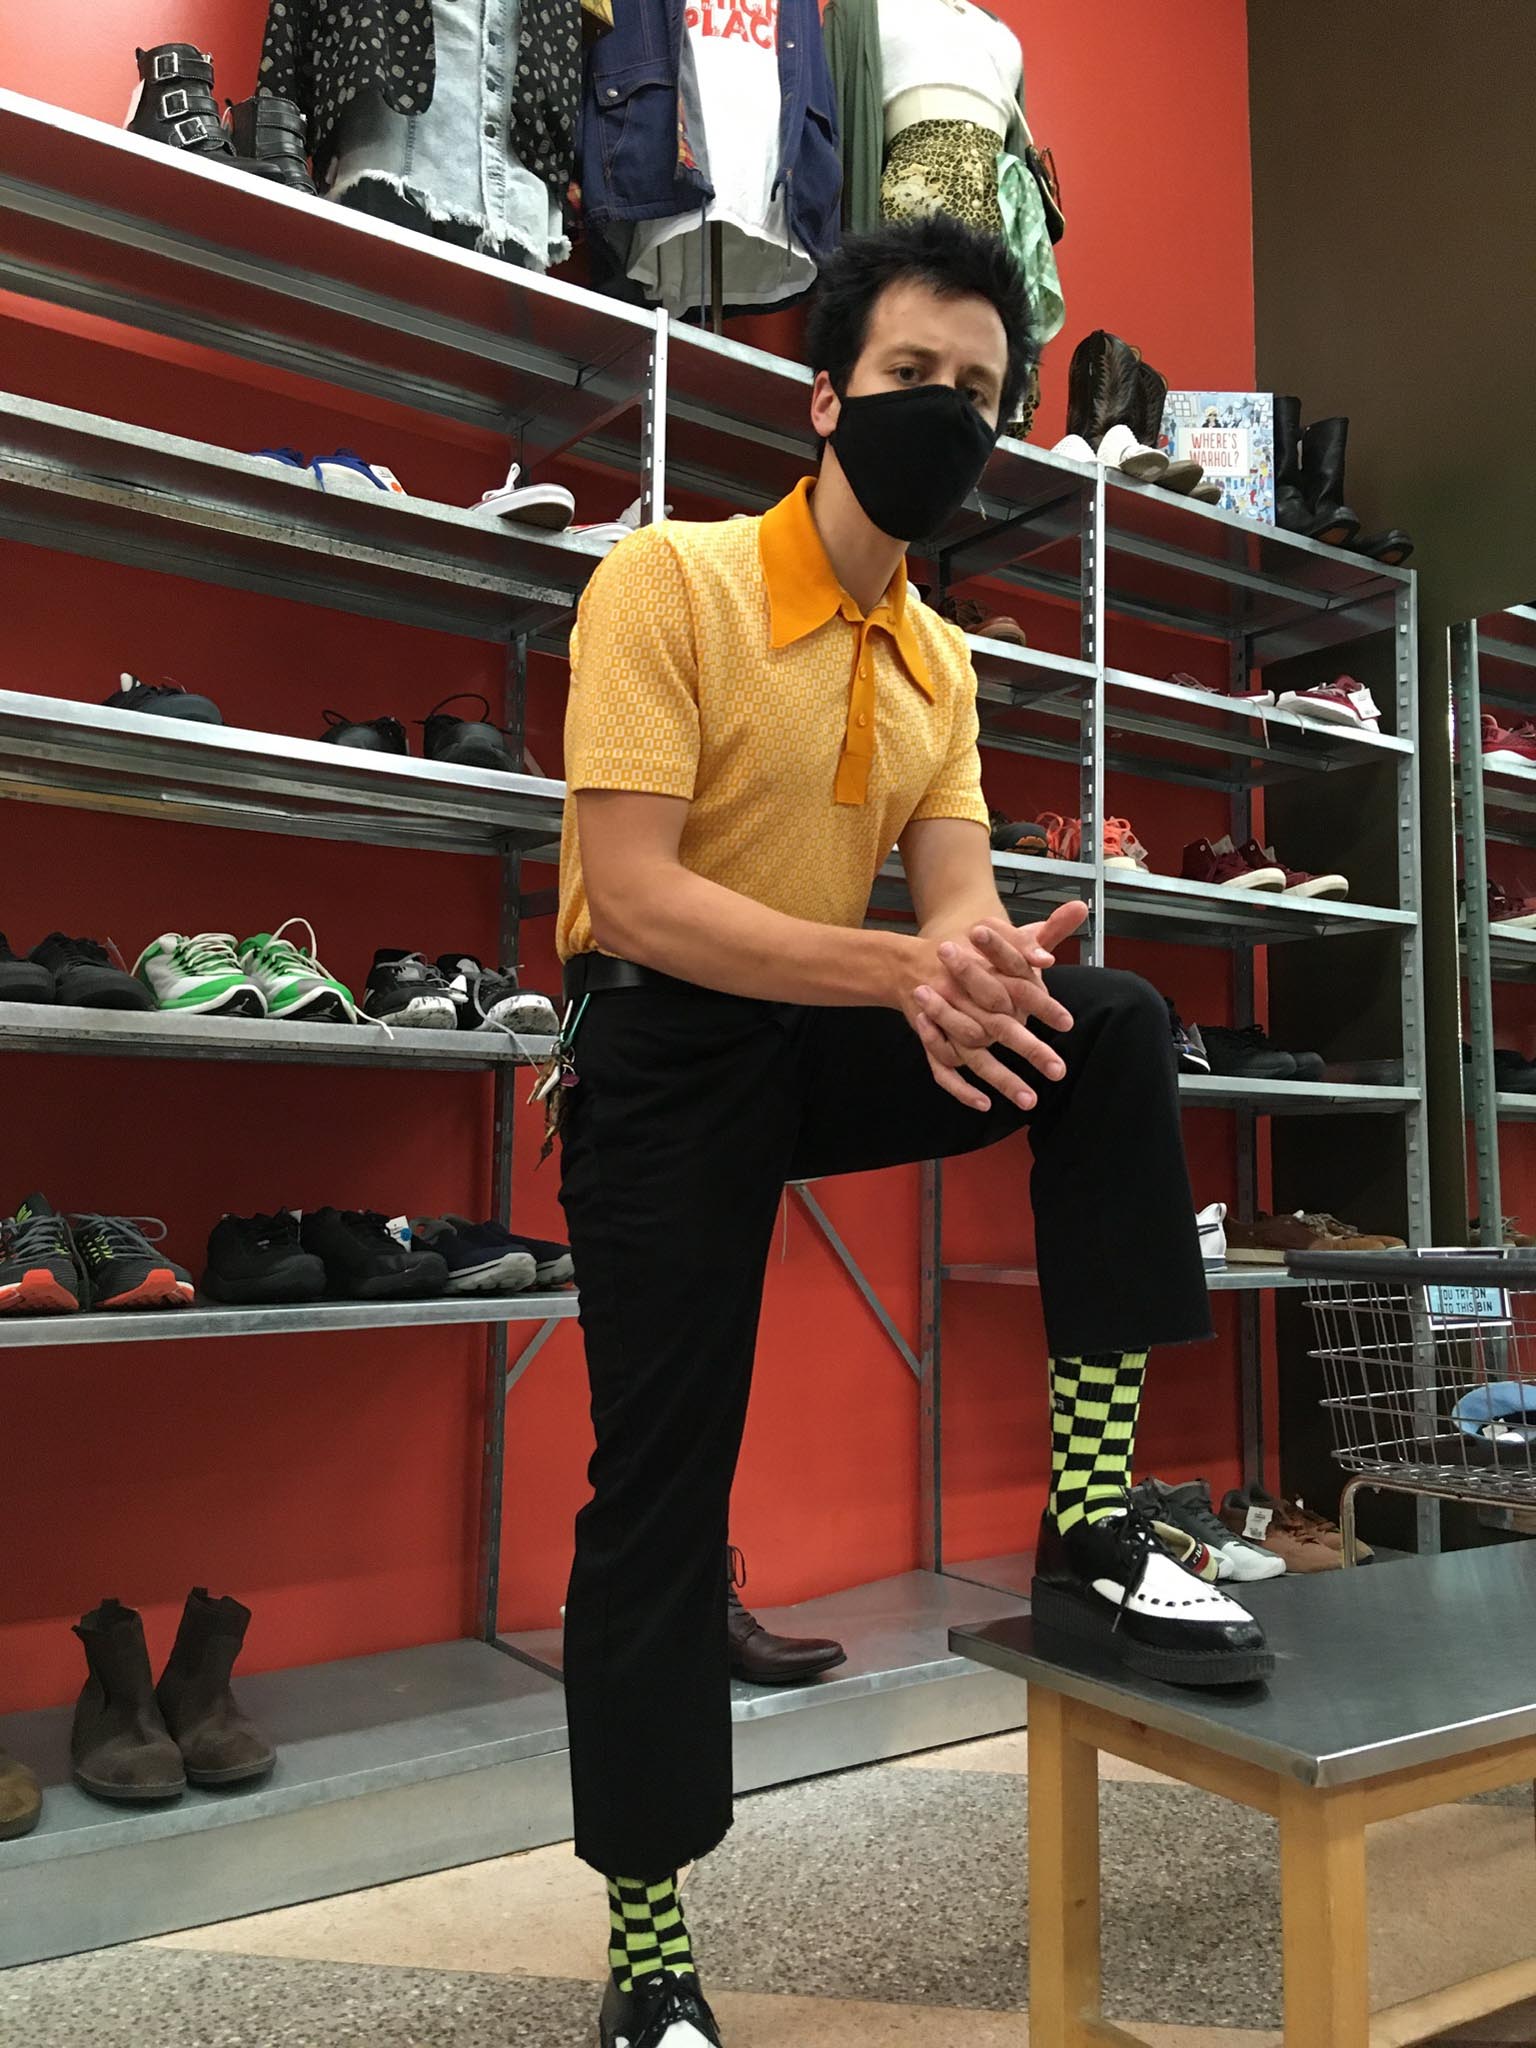 Man standing inside in front of shoe racks with foot up on bench wearing a yellow polo tee and green checkered socks